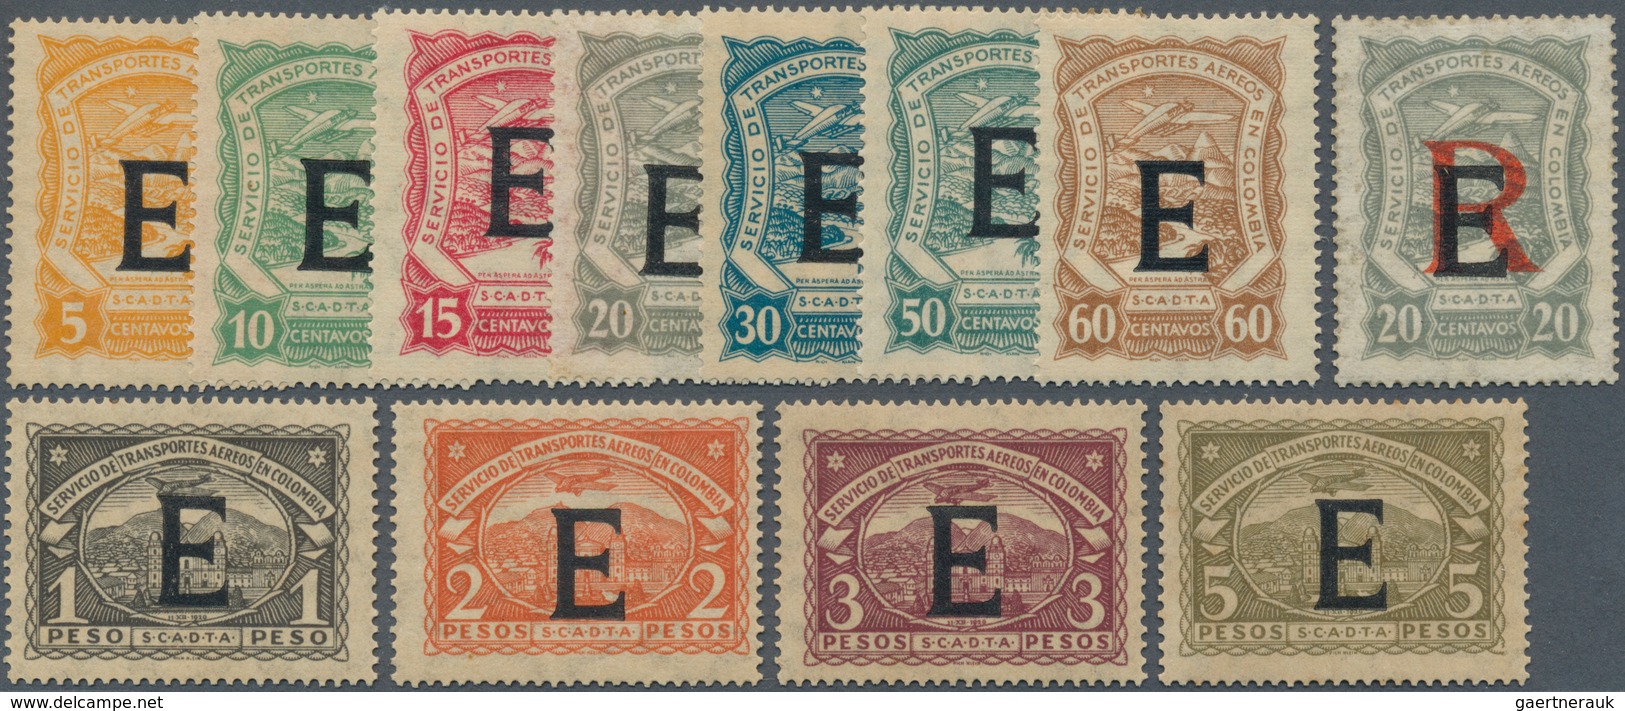 12423 SCADTA - Länder-Aufdrucke: 1923, SPAIN: Colombia Airmail Issue With Black Opt. 'E' Complete Set Of 1 - Avions